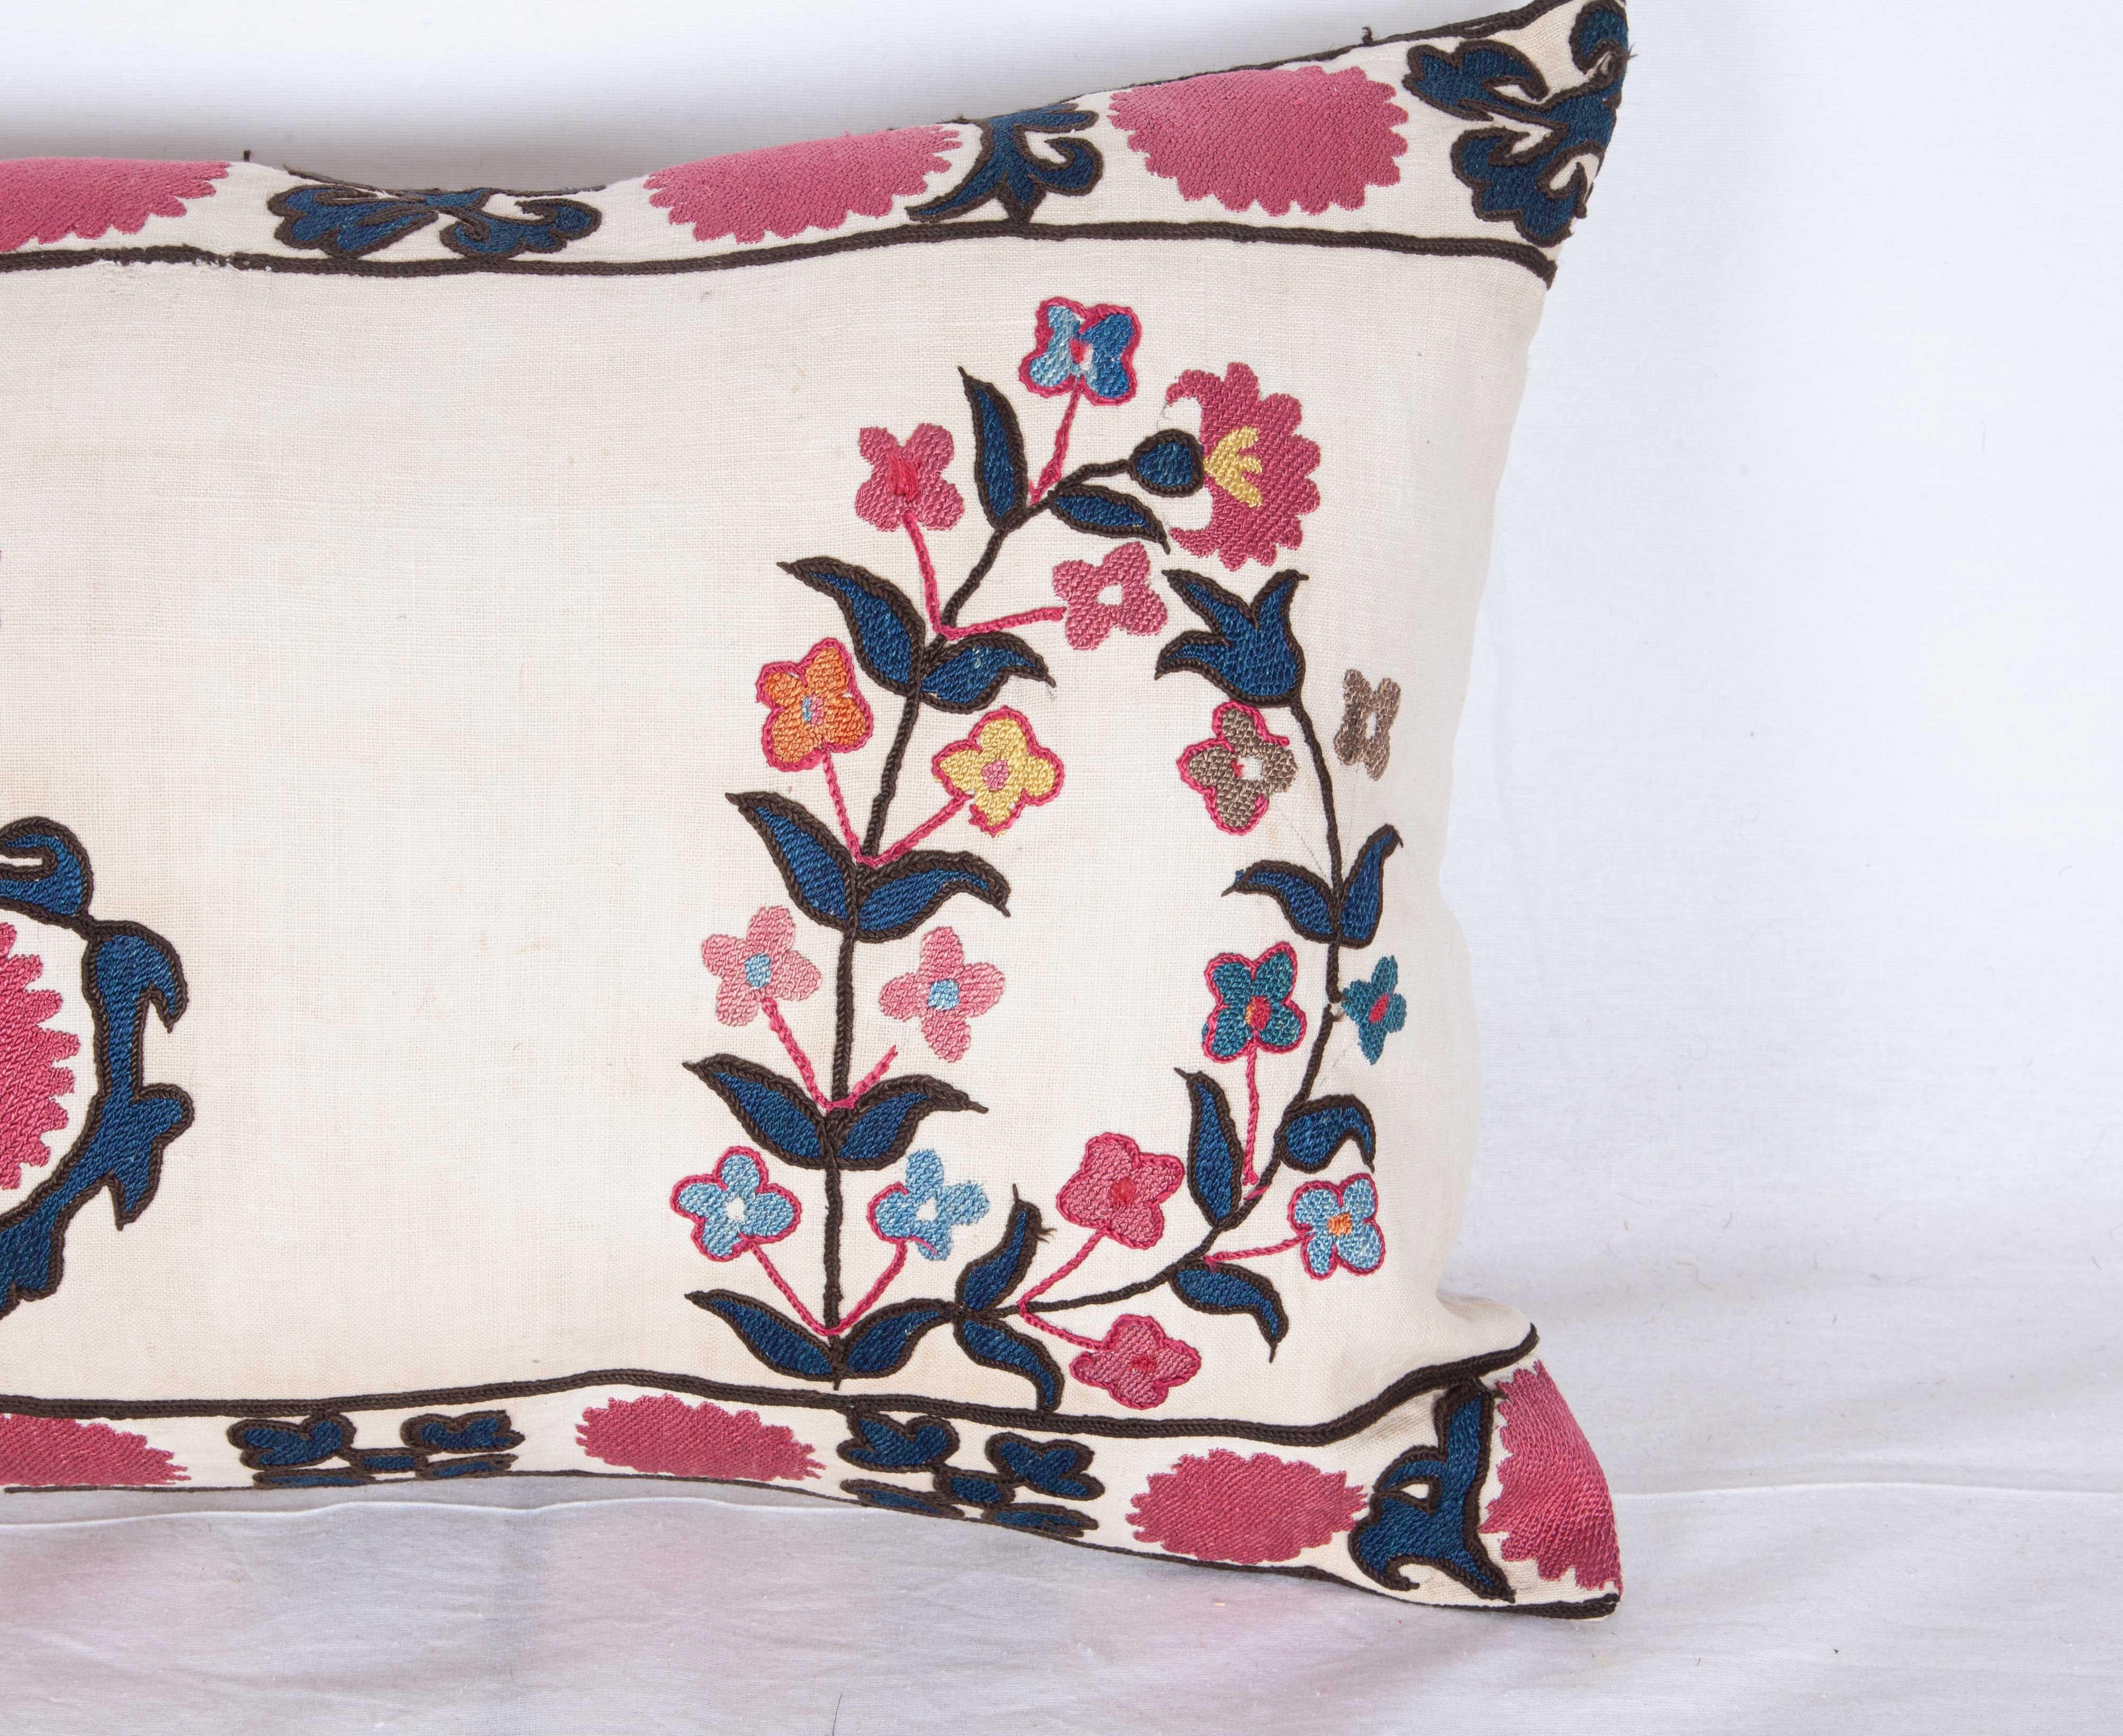 Embroidered Antique Pillow Made from 19th Century Tashkent Suzani